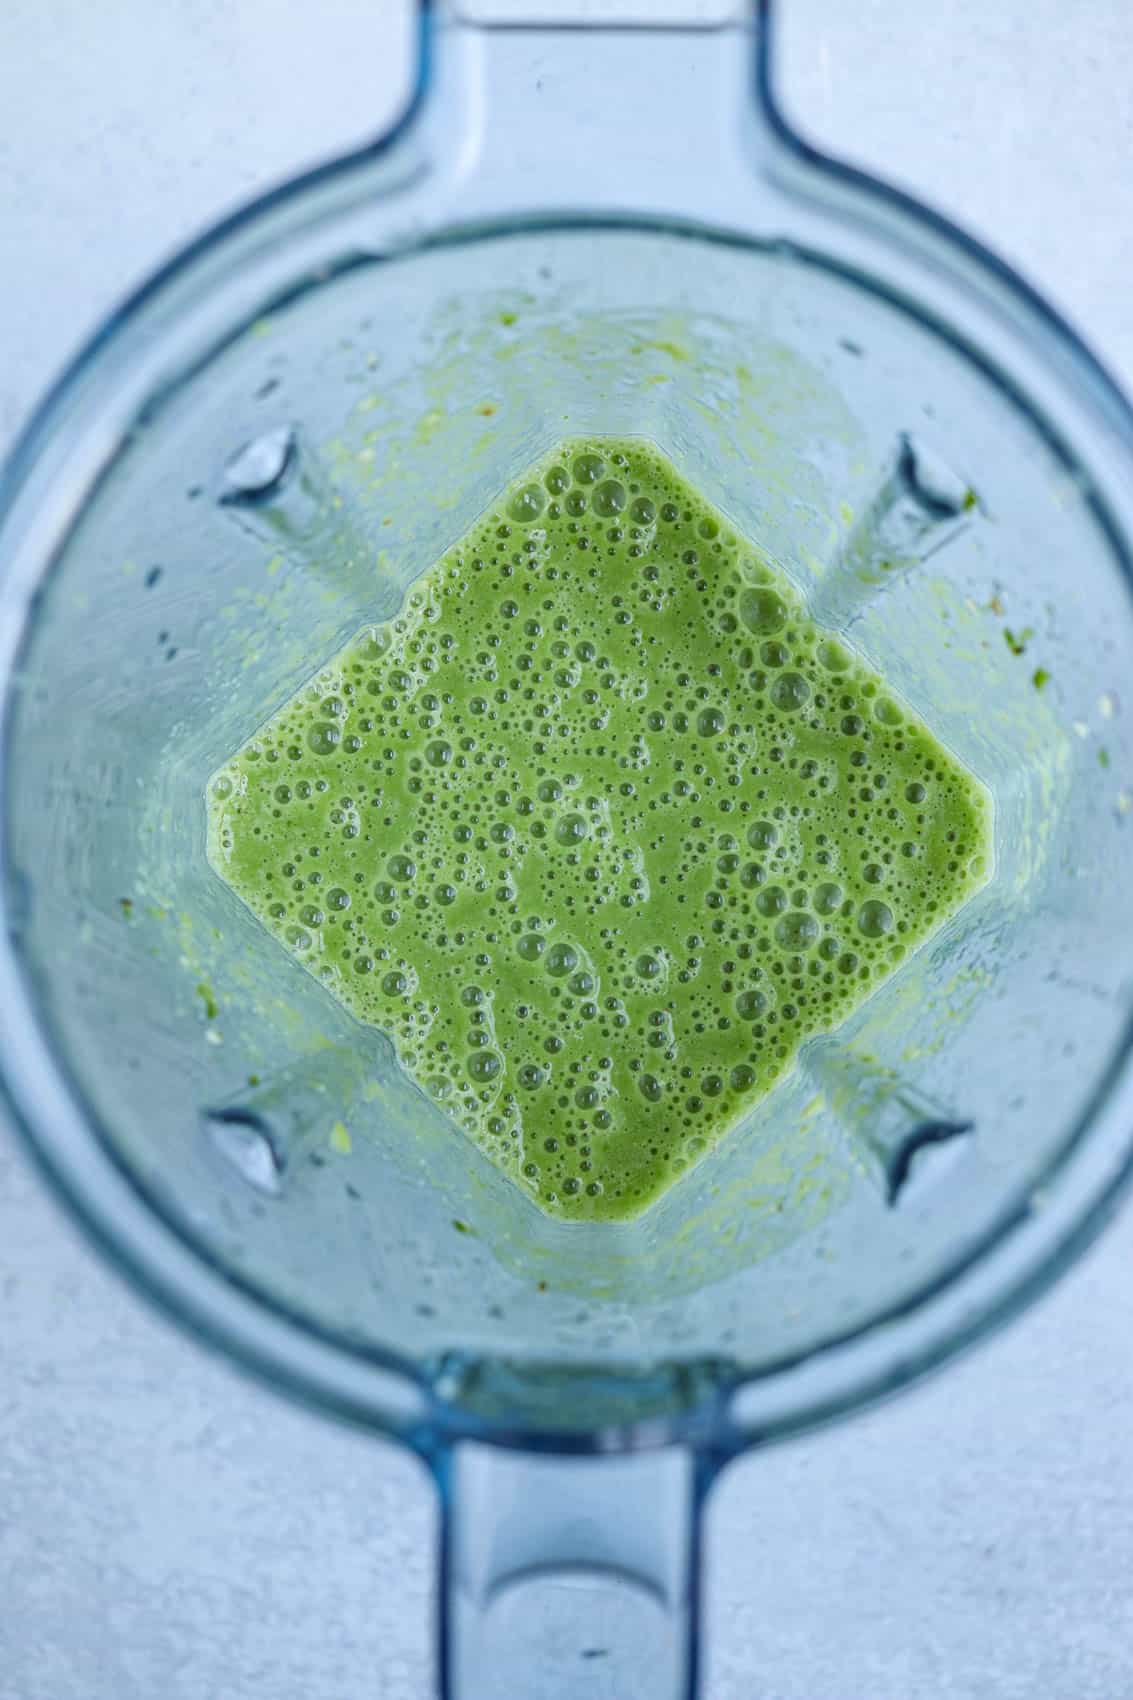 green smoothie in a Vitamix blender, overhead view.